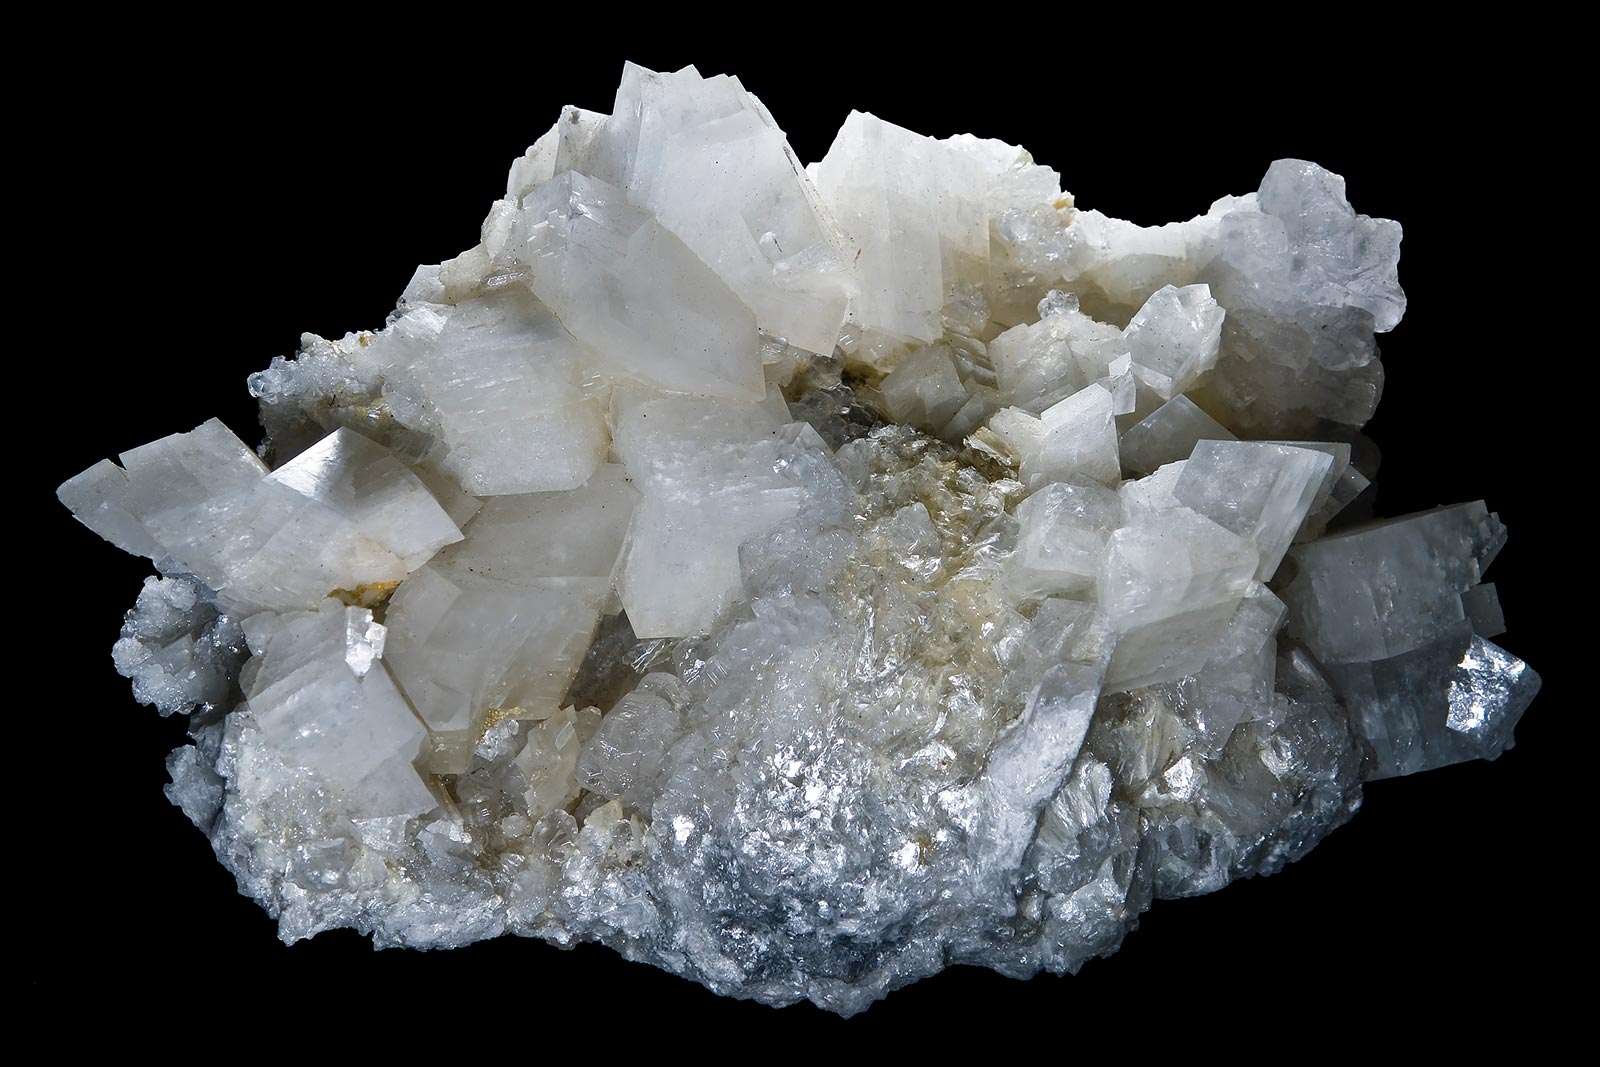 Cluster of dolomite crystals with minor talc from Trimouns Talc Mine, Midi-Pyrénées, France